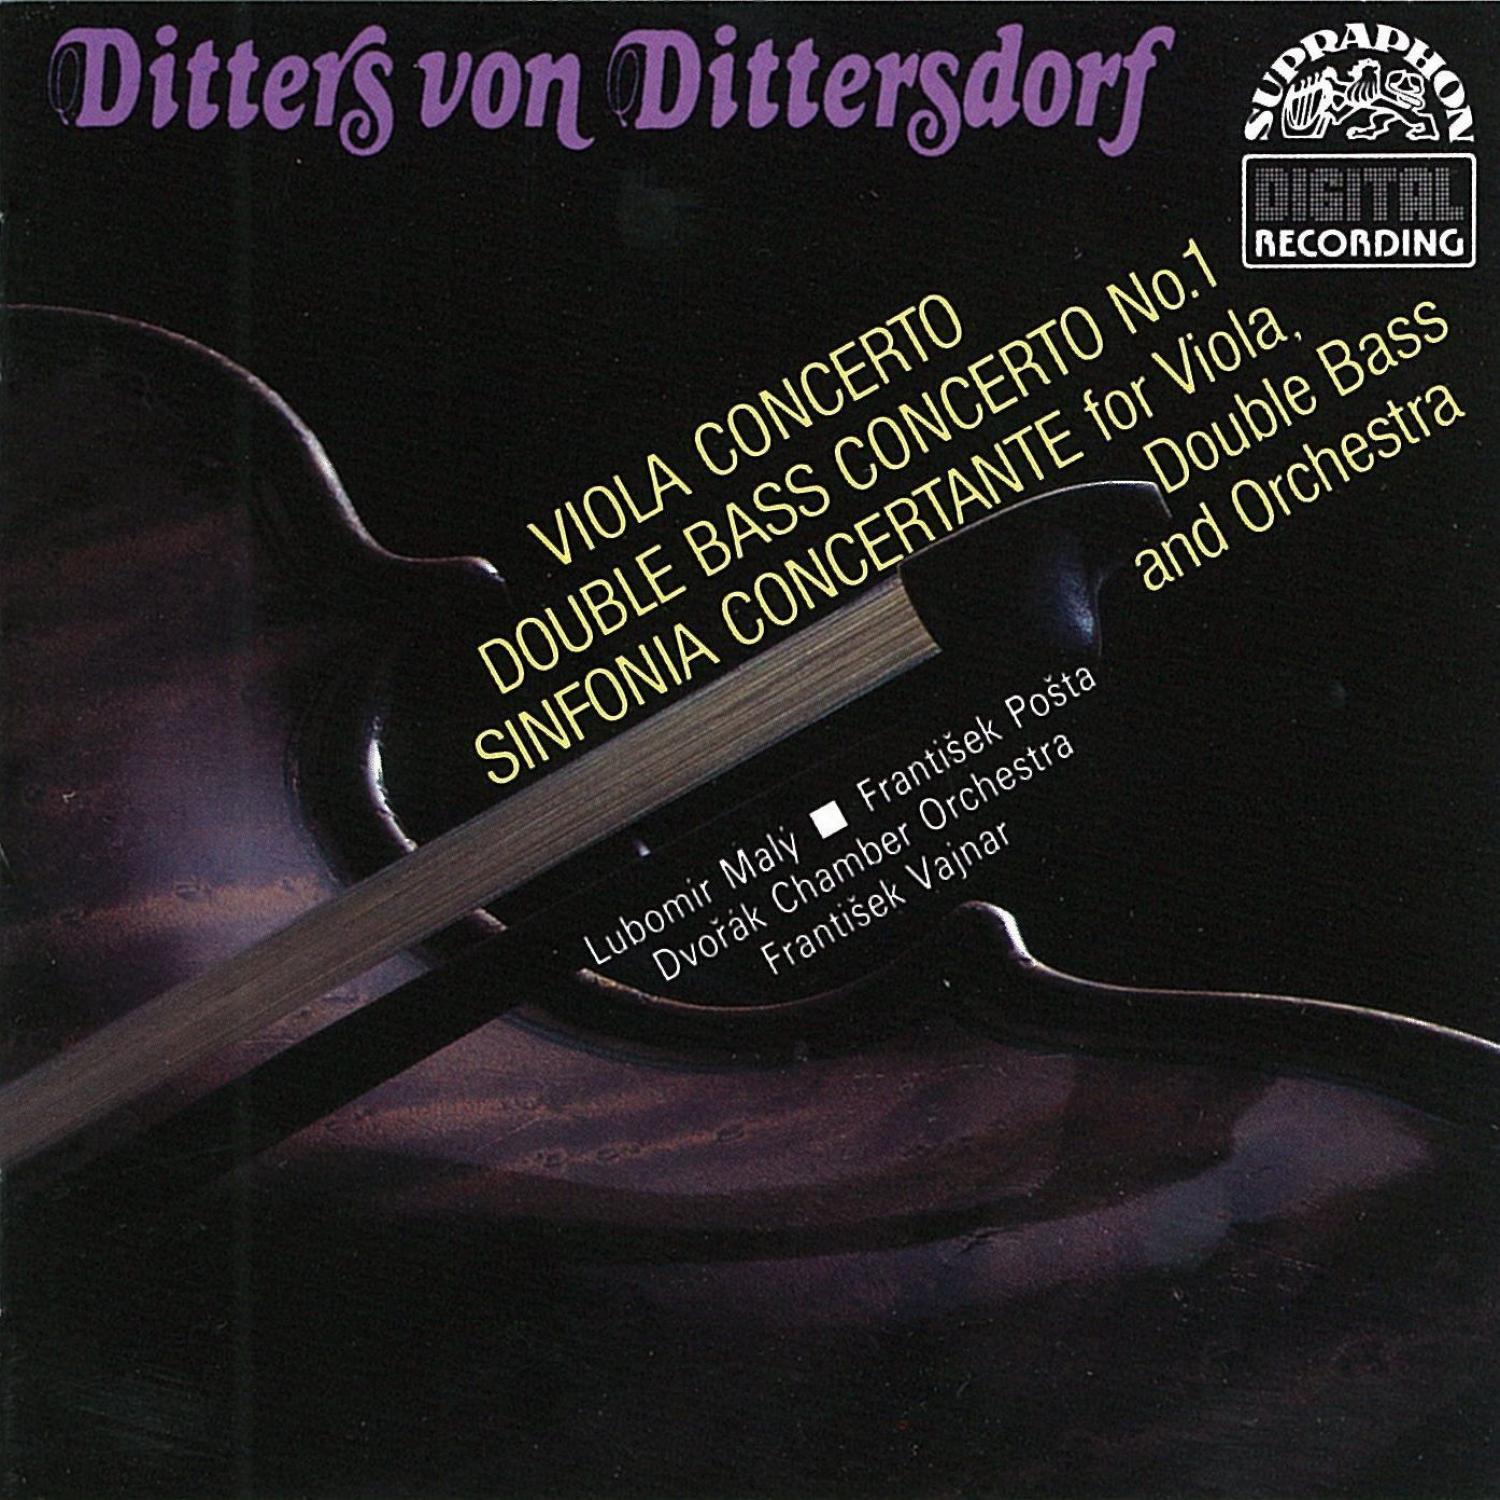 Concerto for Double Bass and Orchestra No. 1 in E flat major: I. Allegro